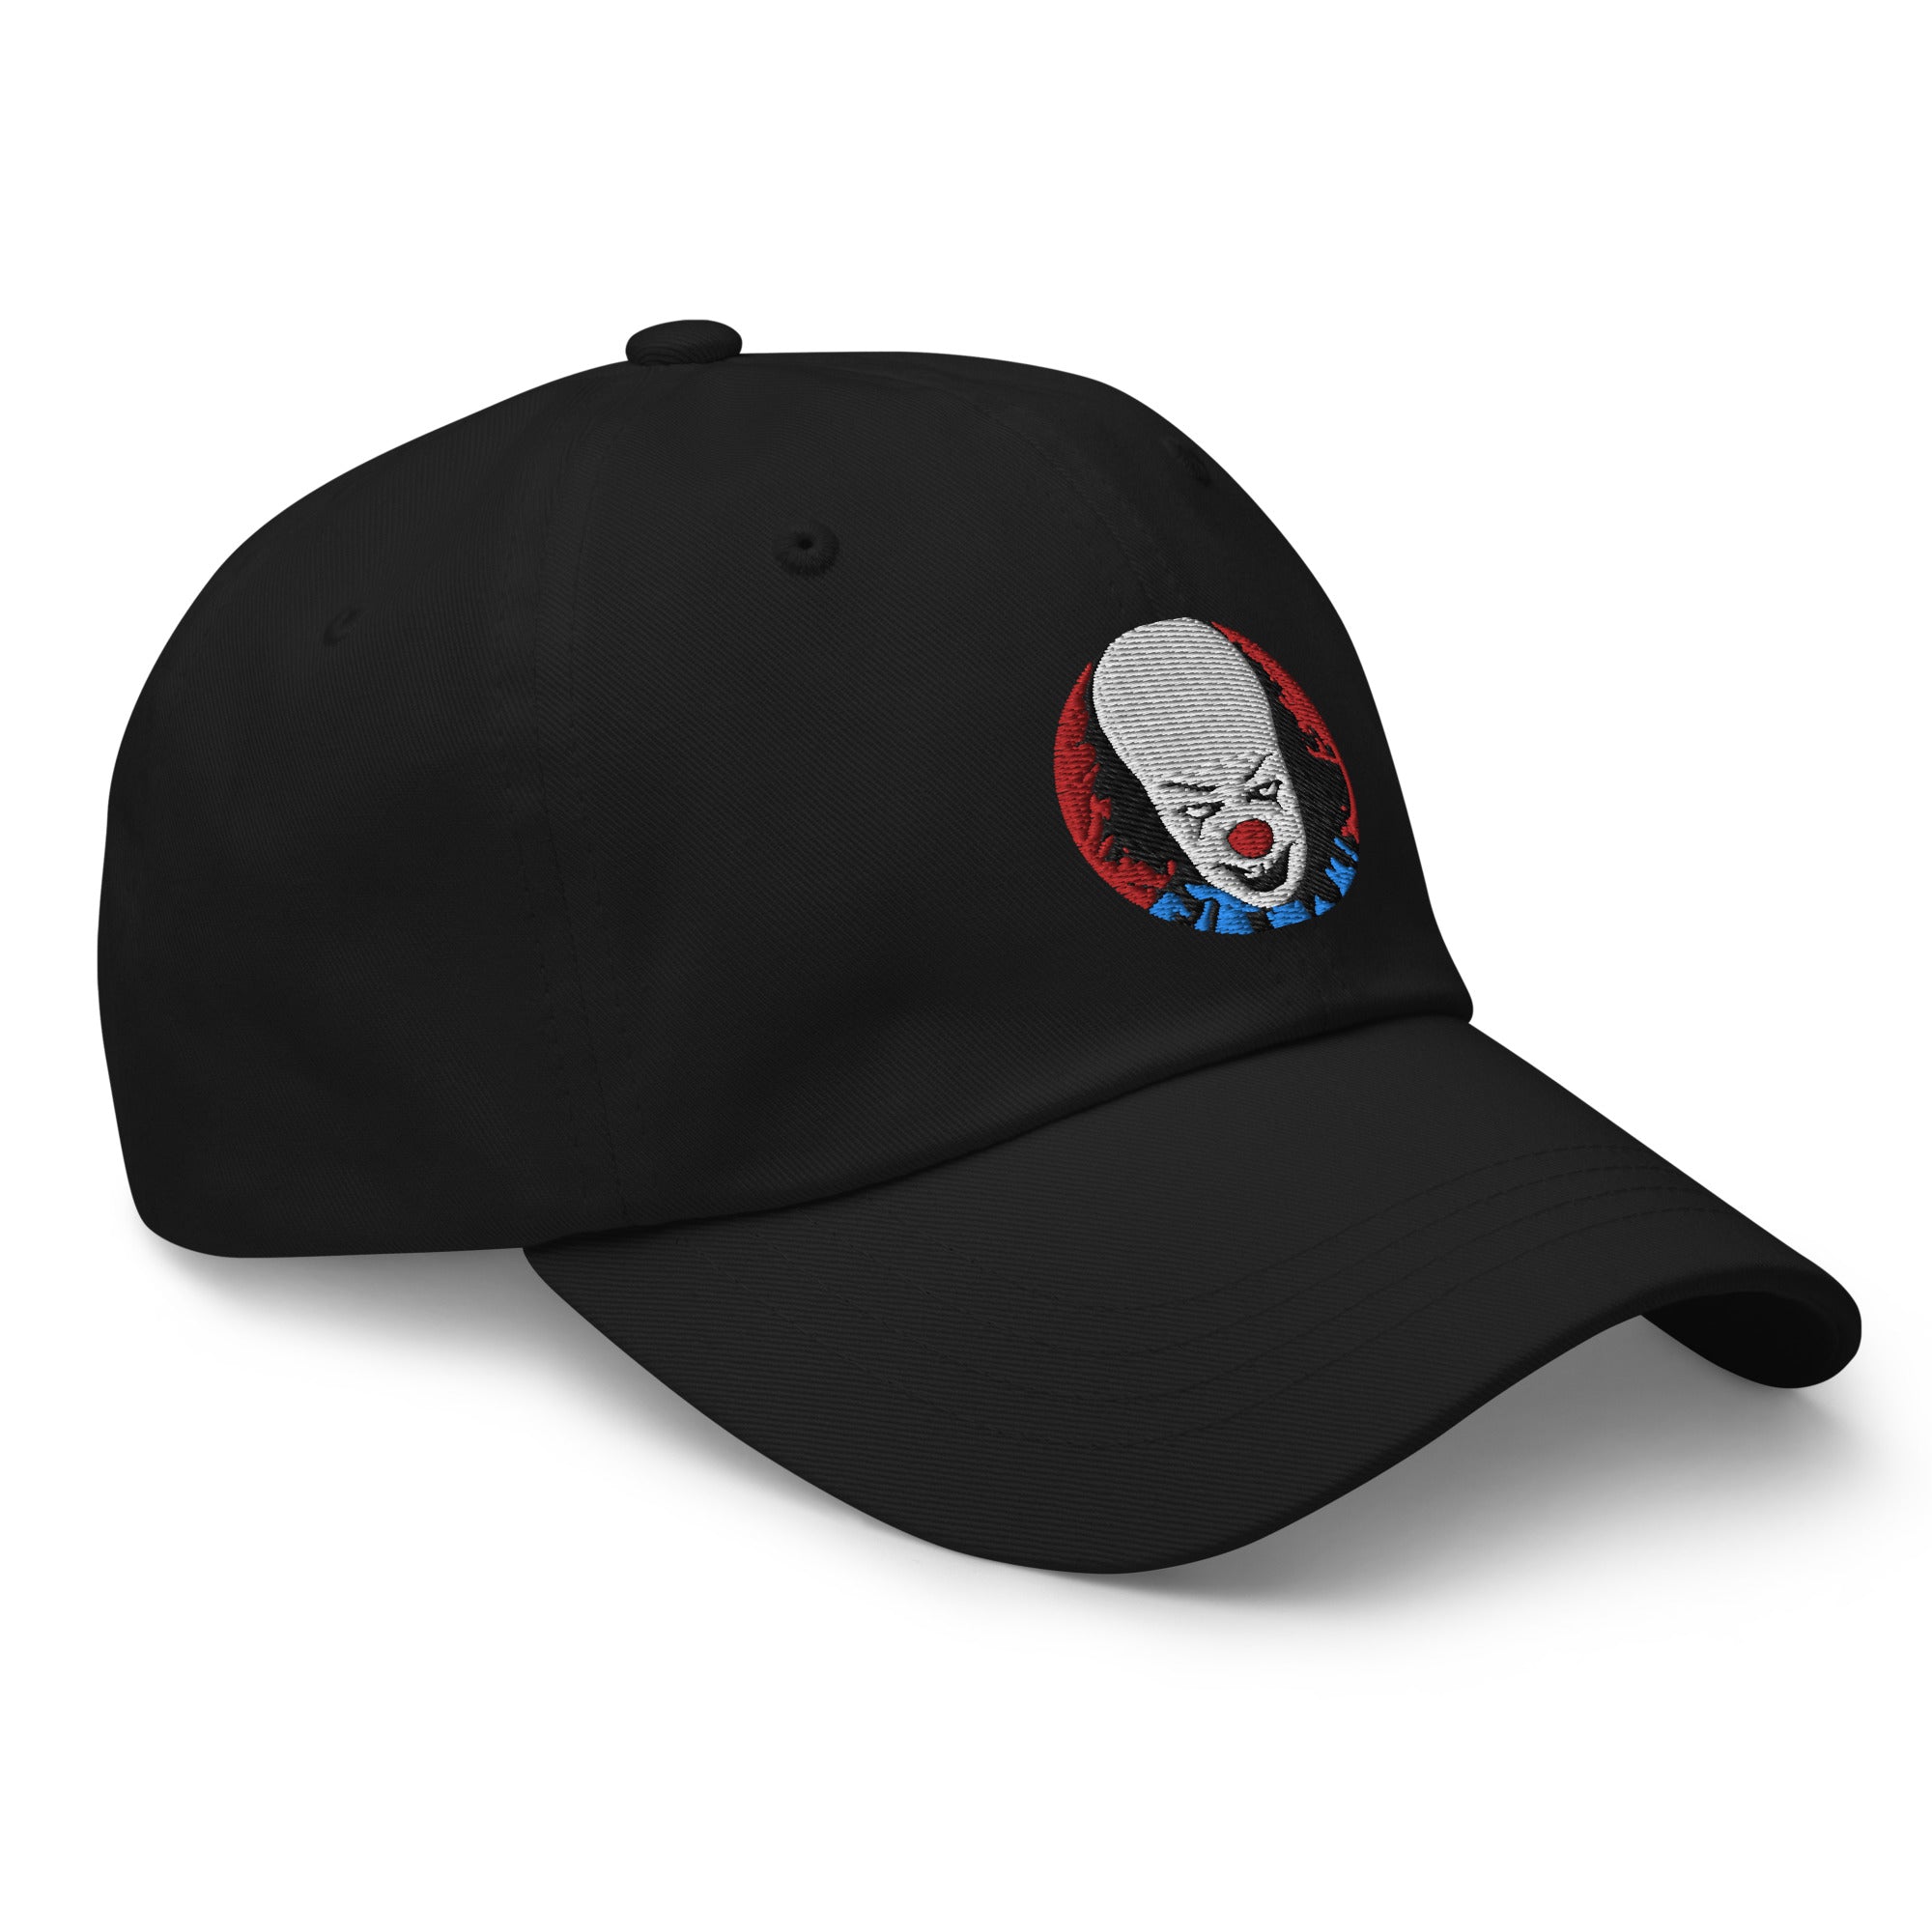 Pennywise The Evil Clown Embroidered Baseball Cap IT Dad hat - Edge of Life Designs